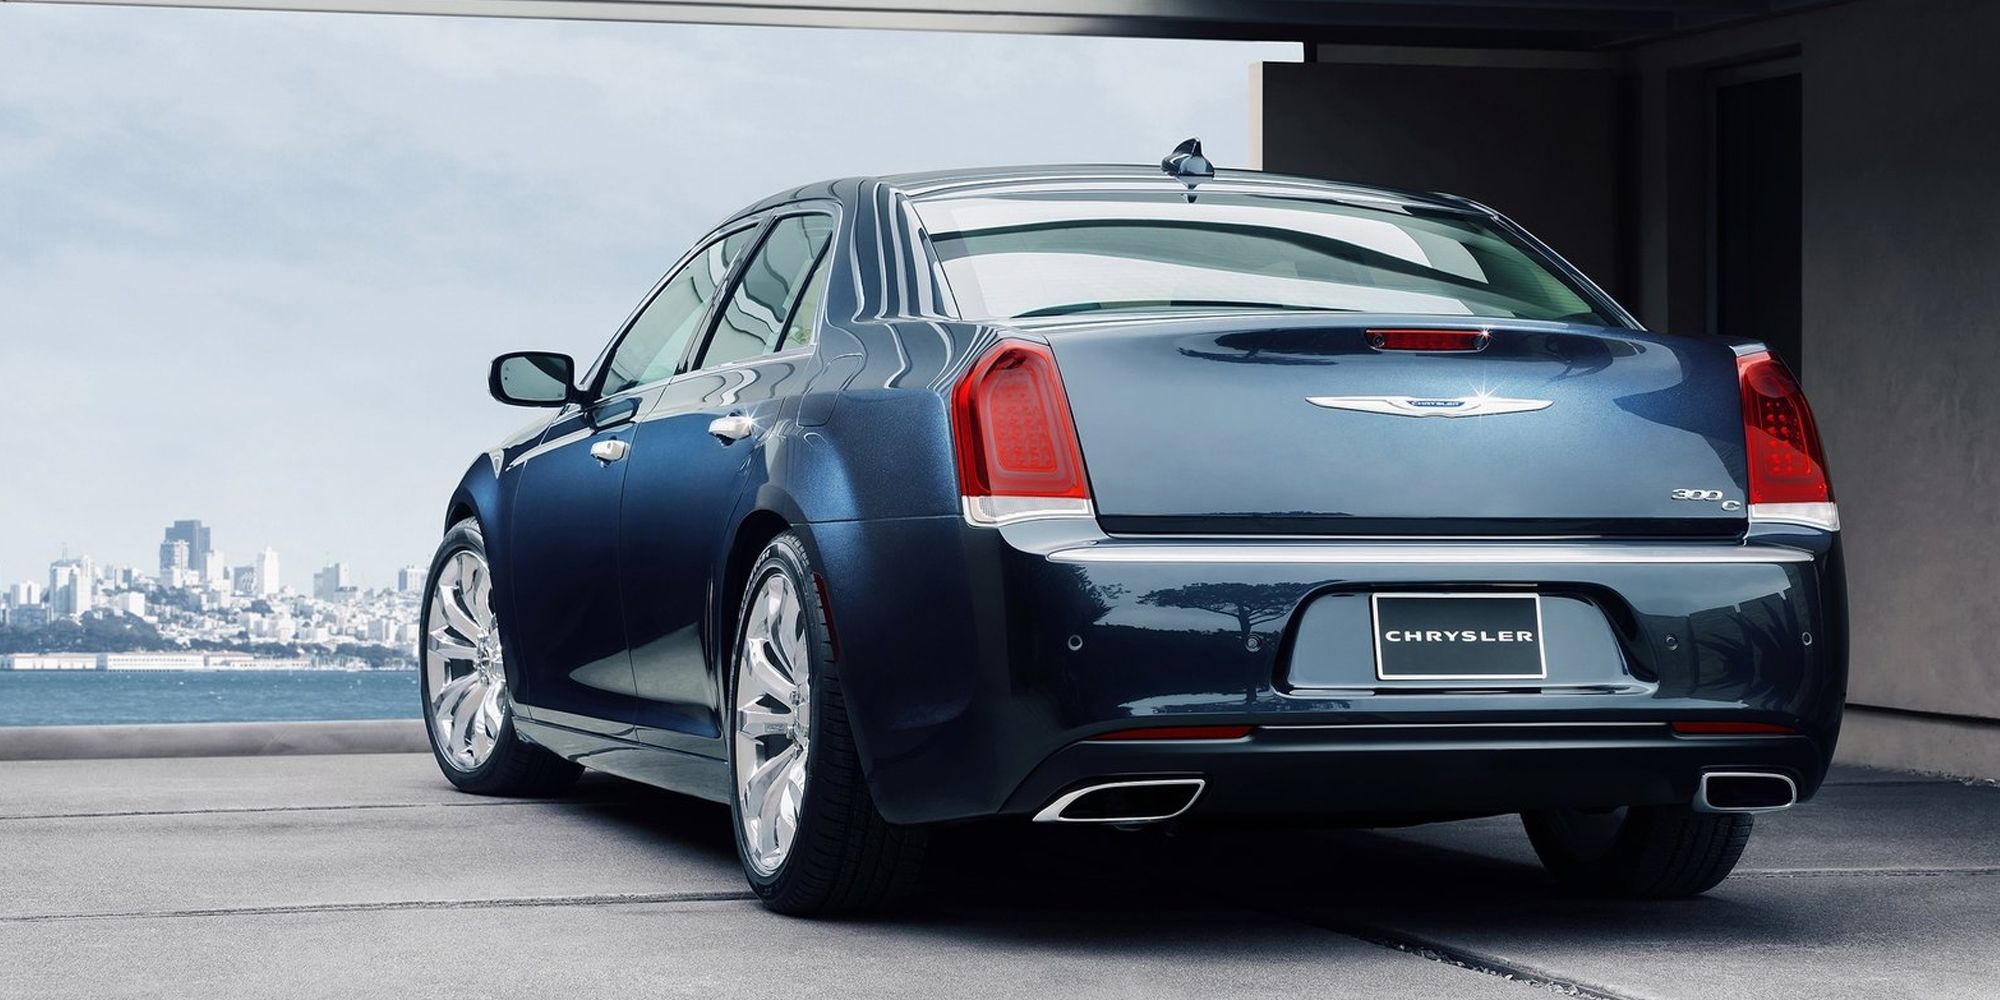 The rear of a blue Chrysler 300